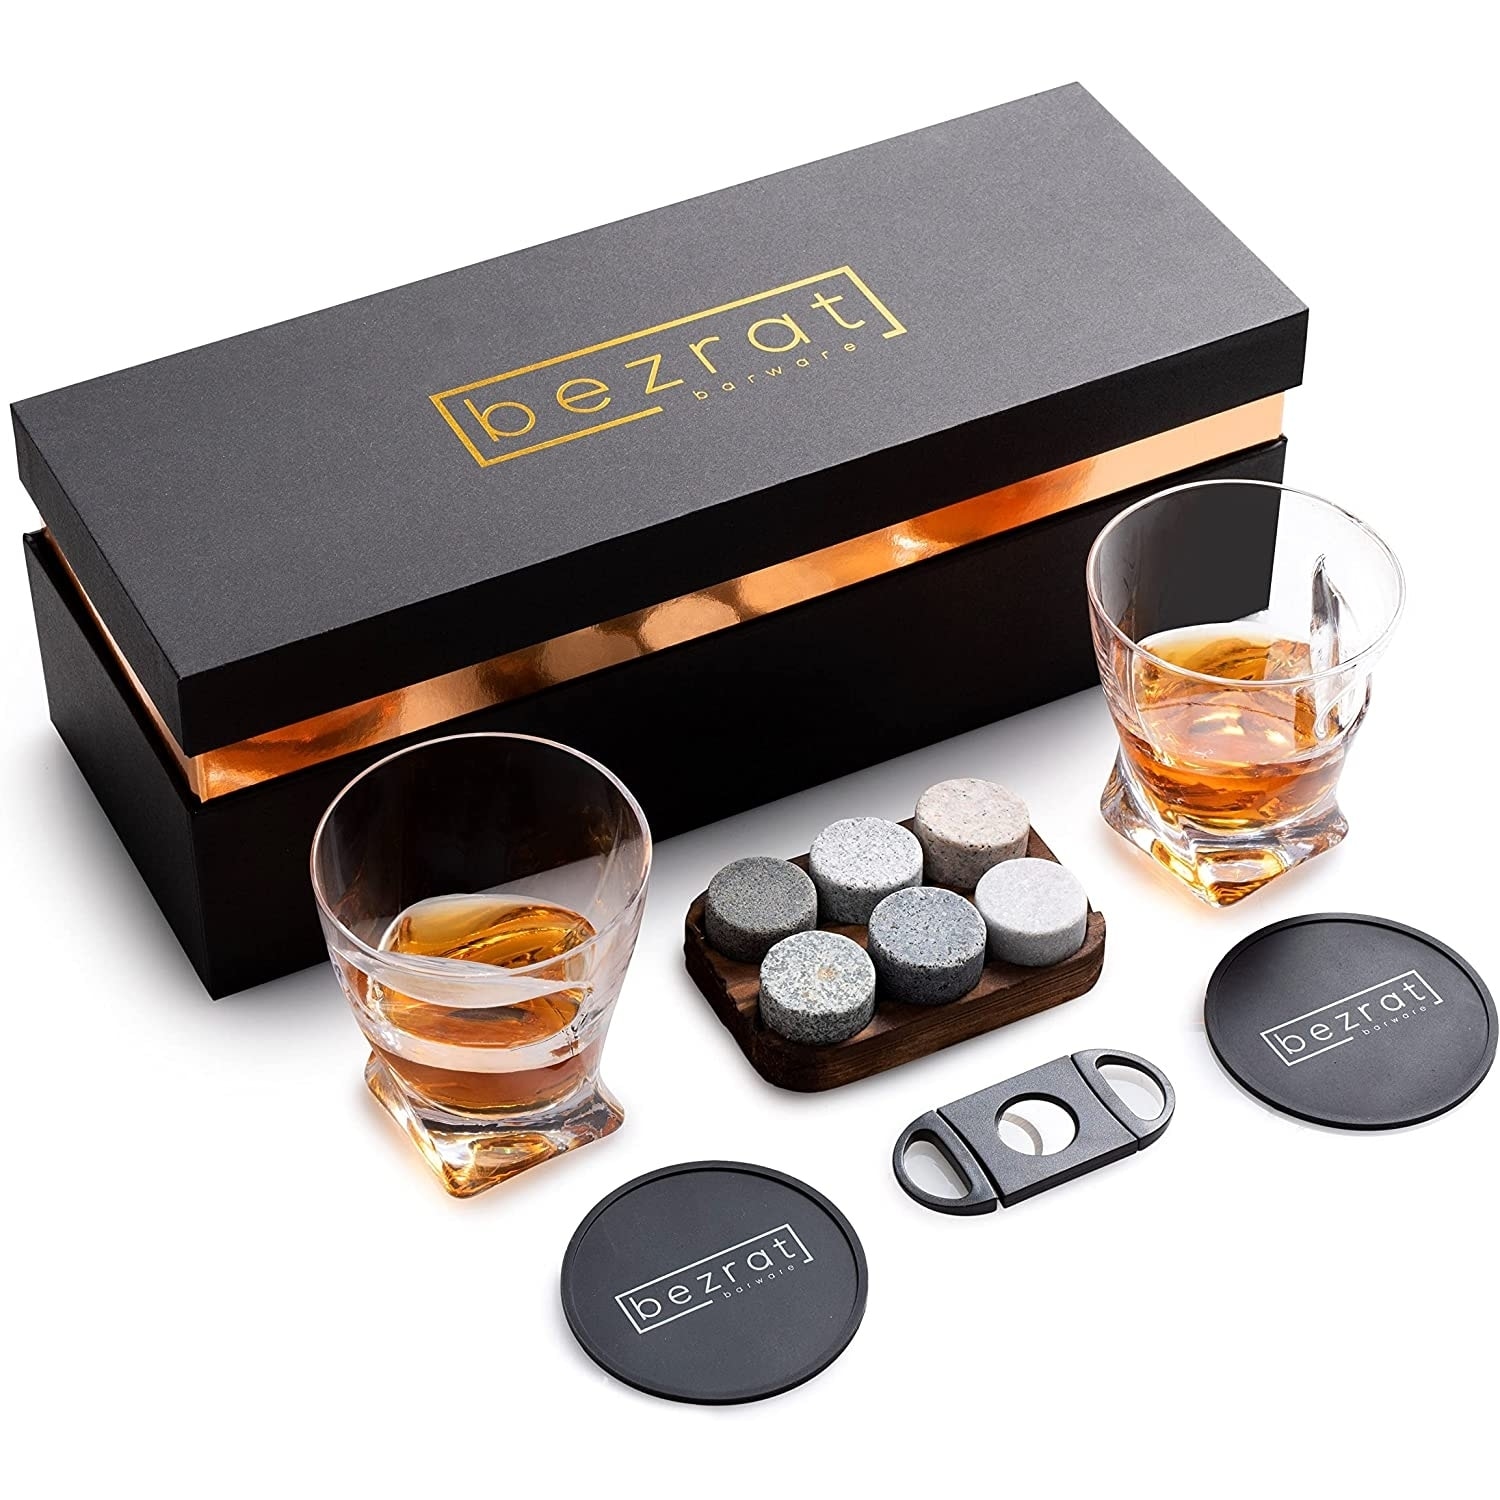 https://ak1.ostkcdn.com/images/products/is/images/direct/06fc30b75f190b38b3c29be031da3c703f61901b/Whiskey-Glasses-and-Accessories-Set.jpg